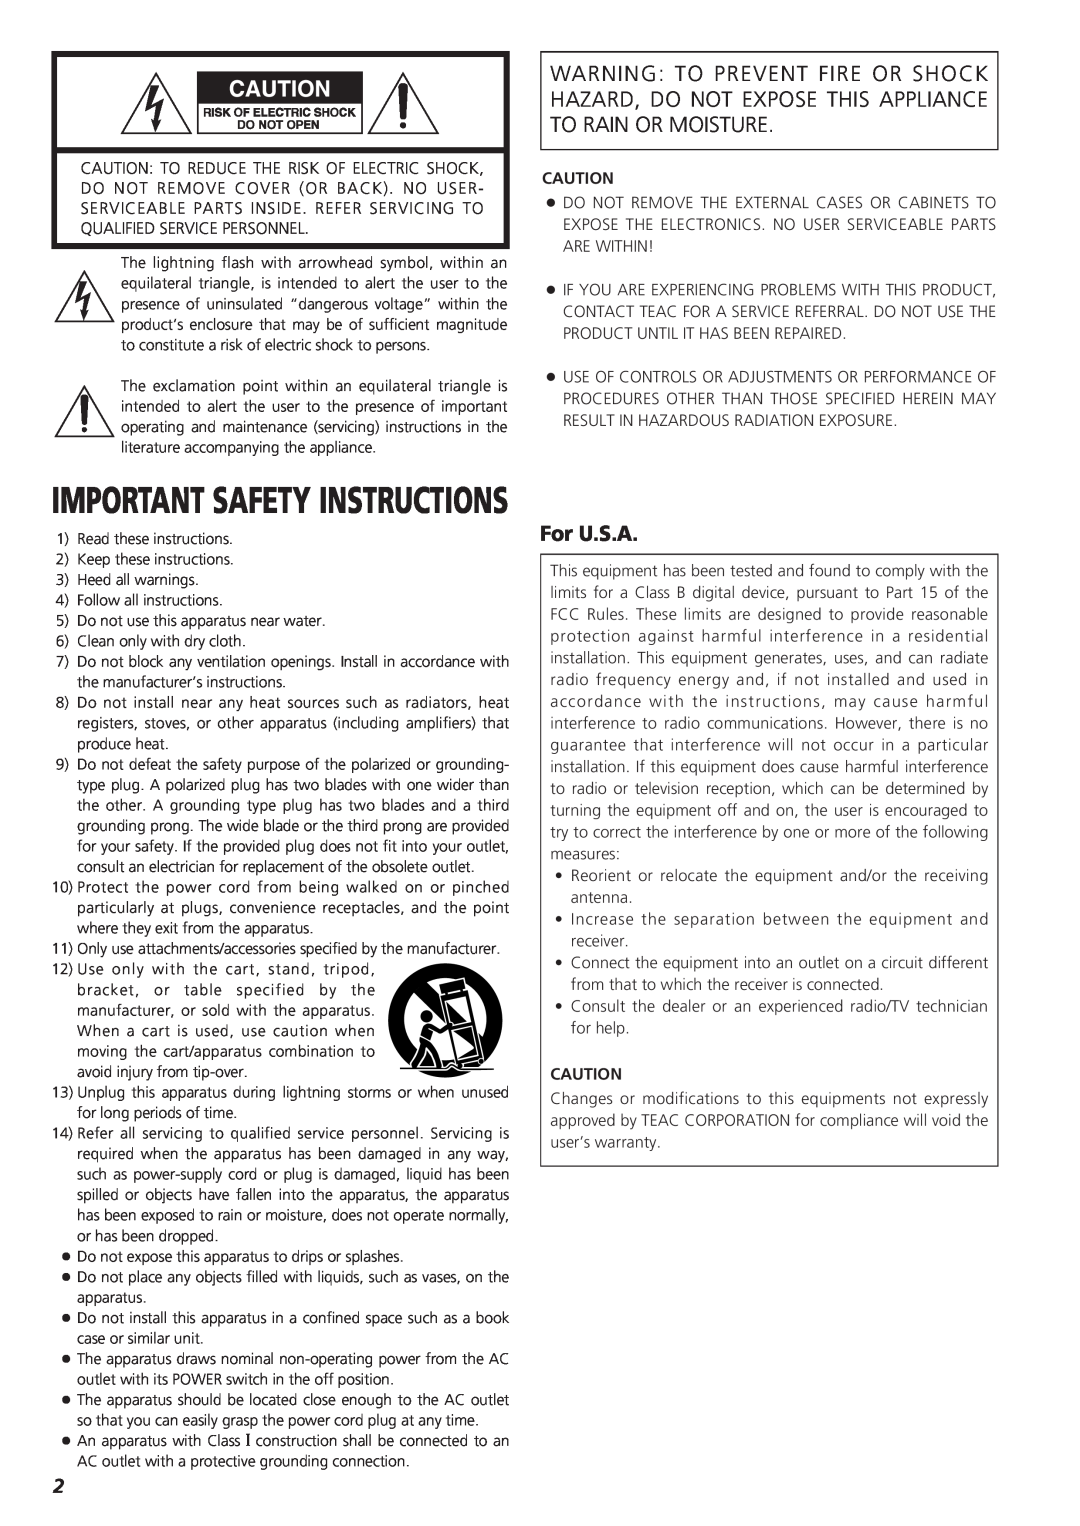 Teac X-01 owner manual For U.S.A, Important Safety Instructions 